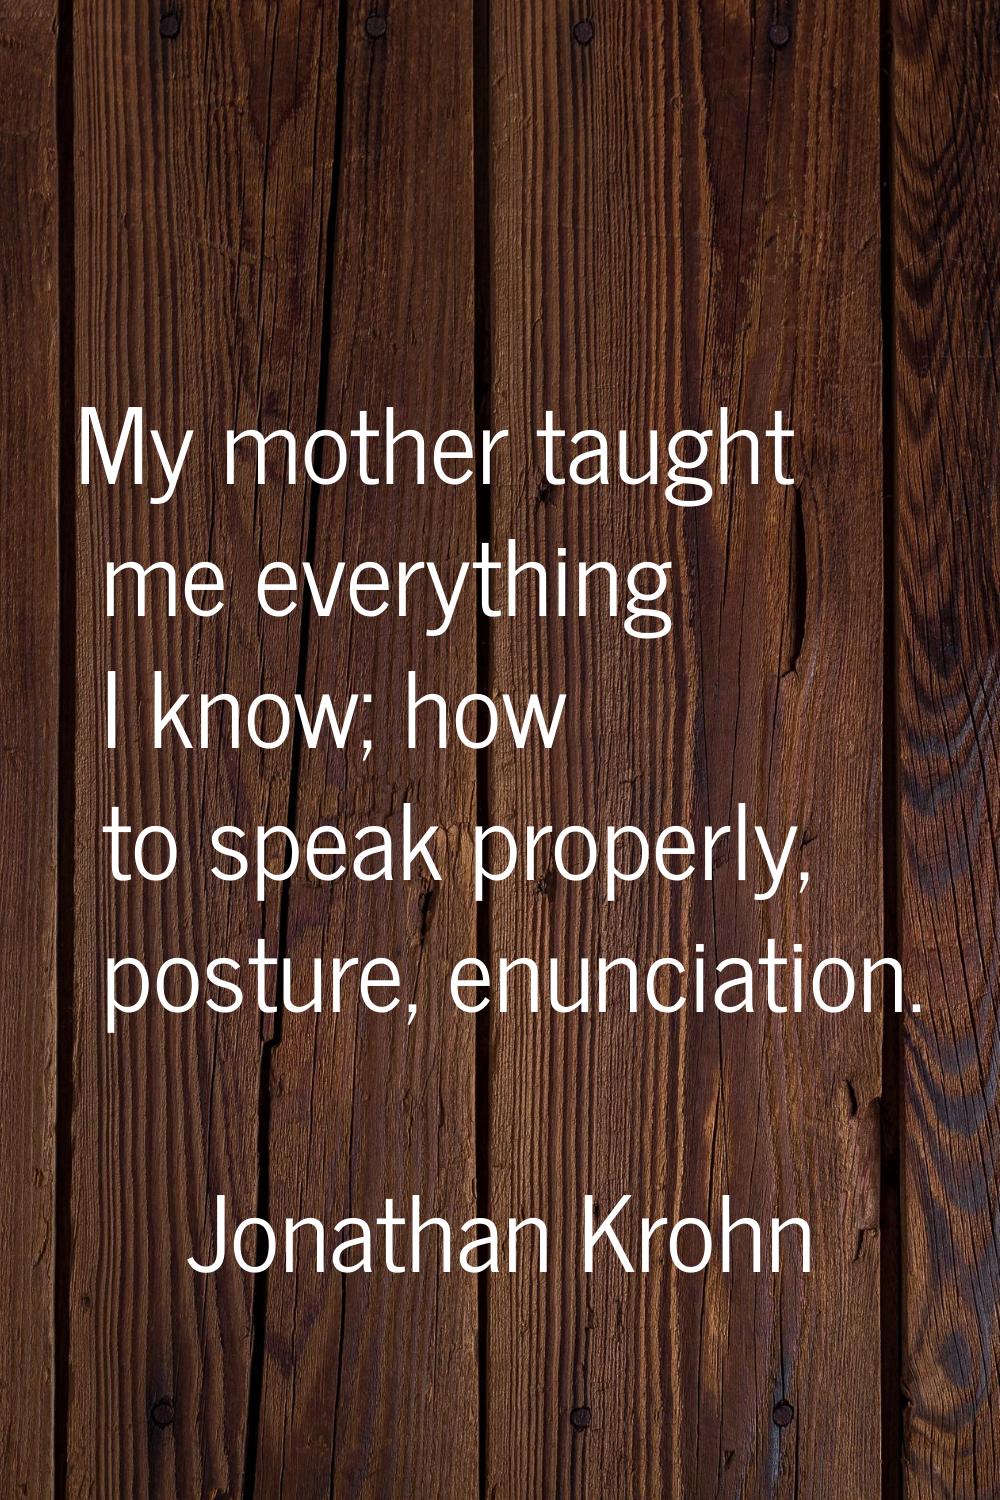 My mother taught me everything I know; how to speak properly, posture, enunciation.